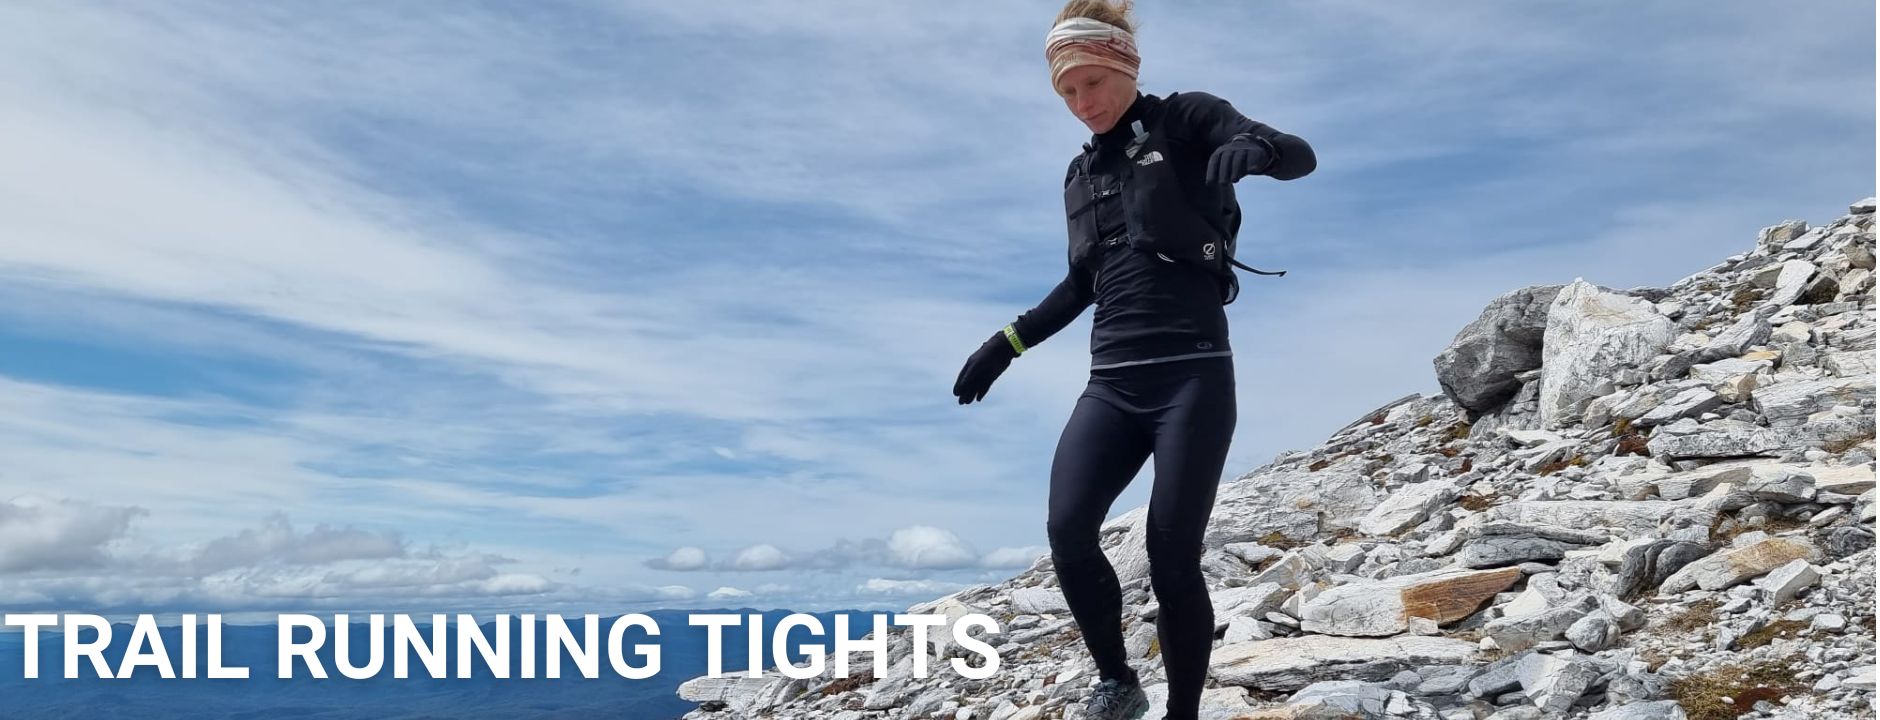 Trail Running Tights – Find Your Feet